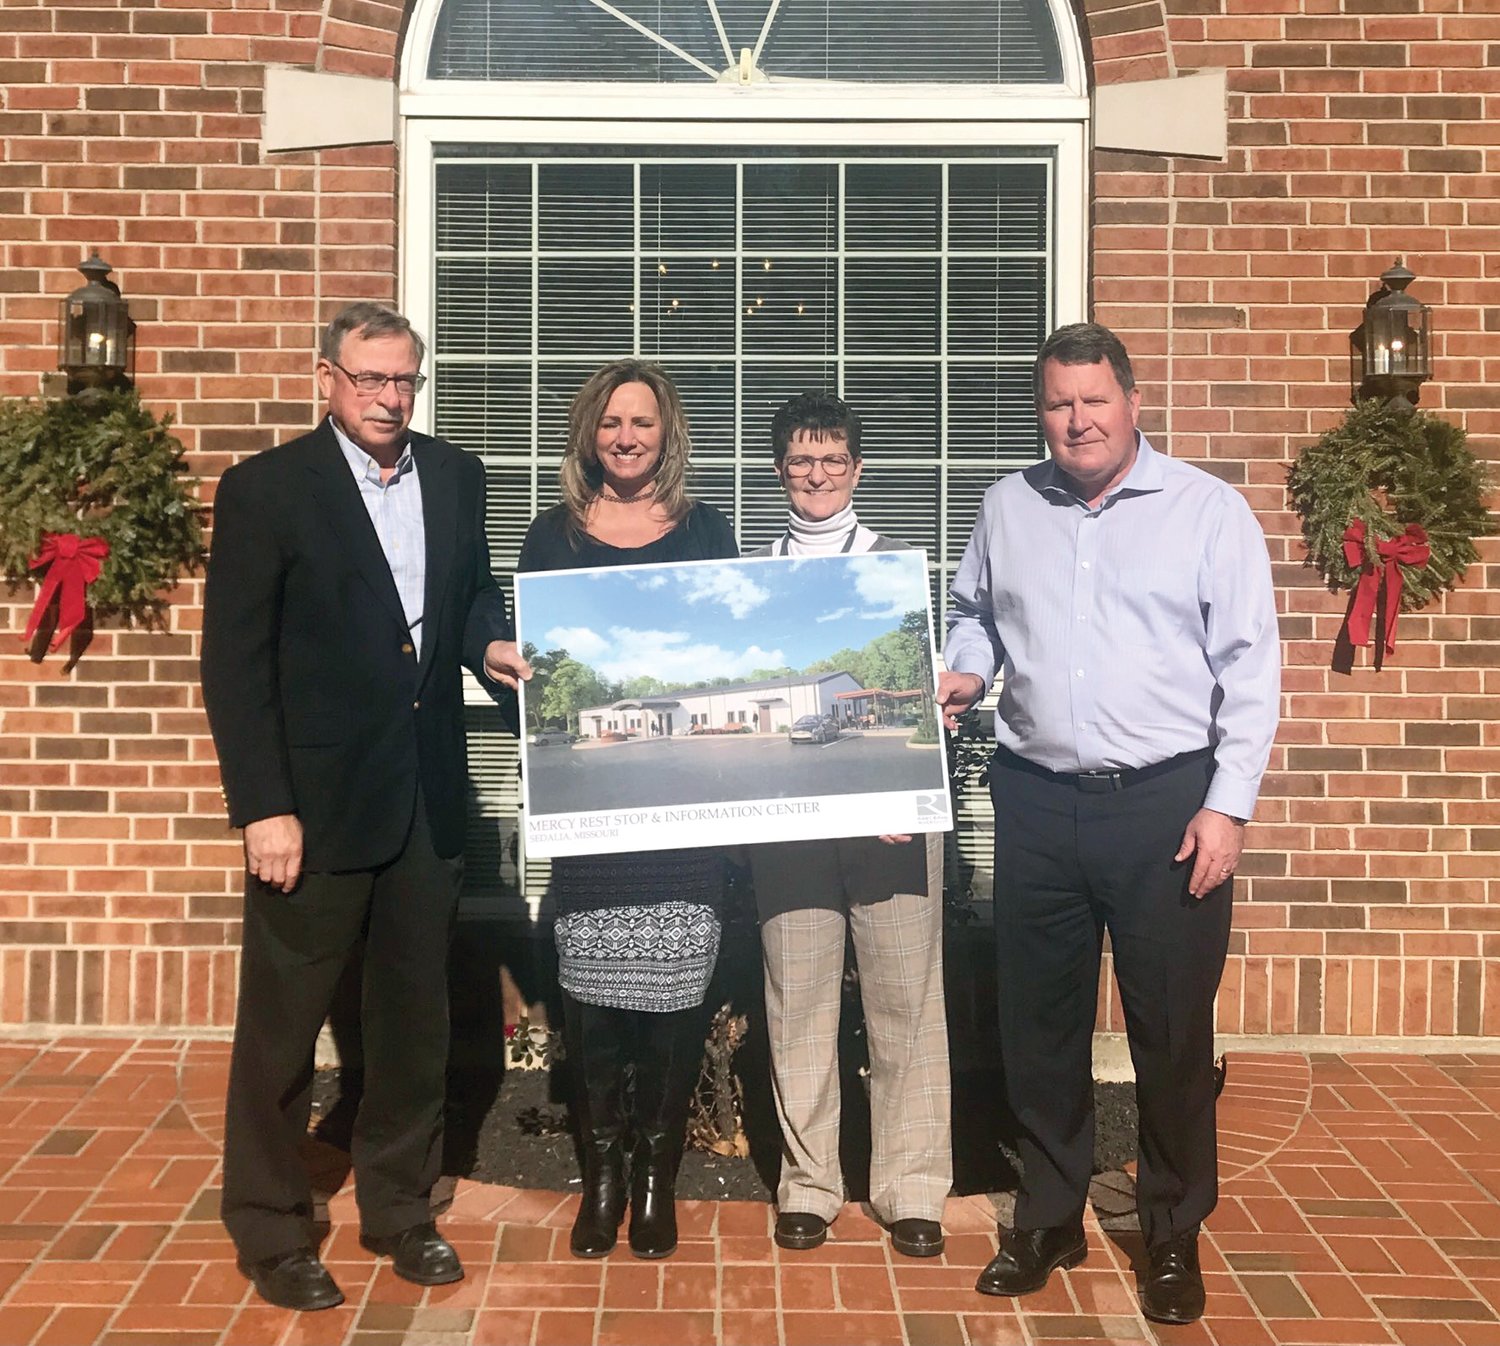 The Buckley & Buckley Law Firm, of Sedalia, recently supported the construction of Mercy Rest Stop through a financial contribution of $5,000 and legal services. From left are Bill Turner, chair of the Mercy Rest Stop board, and Kim Nusser, Debbie Ulmer and Jim Buckely of the law firm, holding a rendering of the Mercy Rest Stop facility.